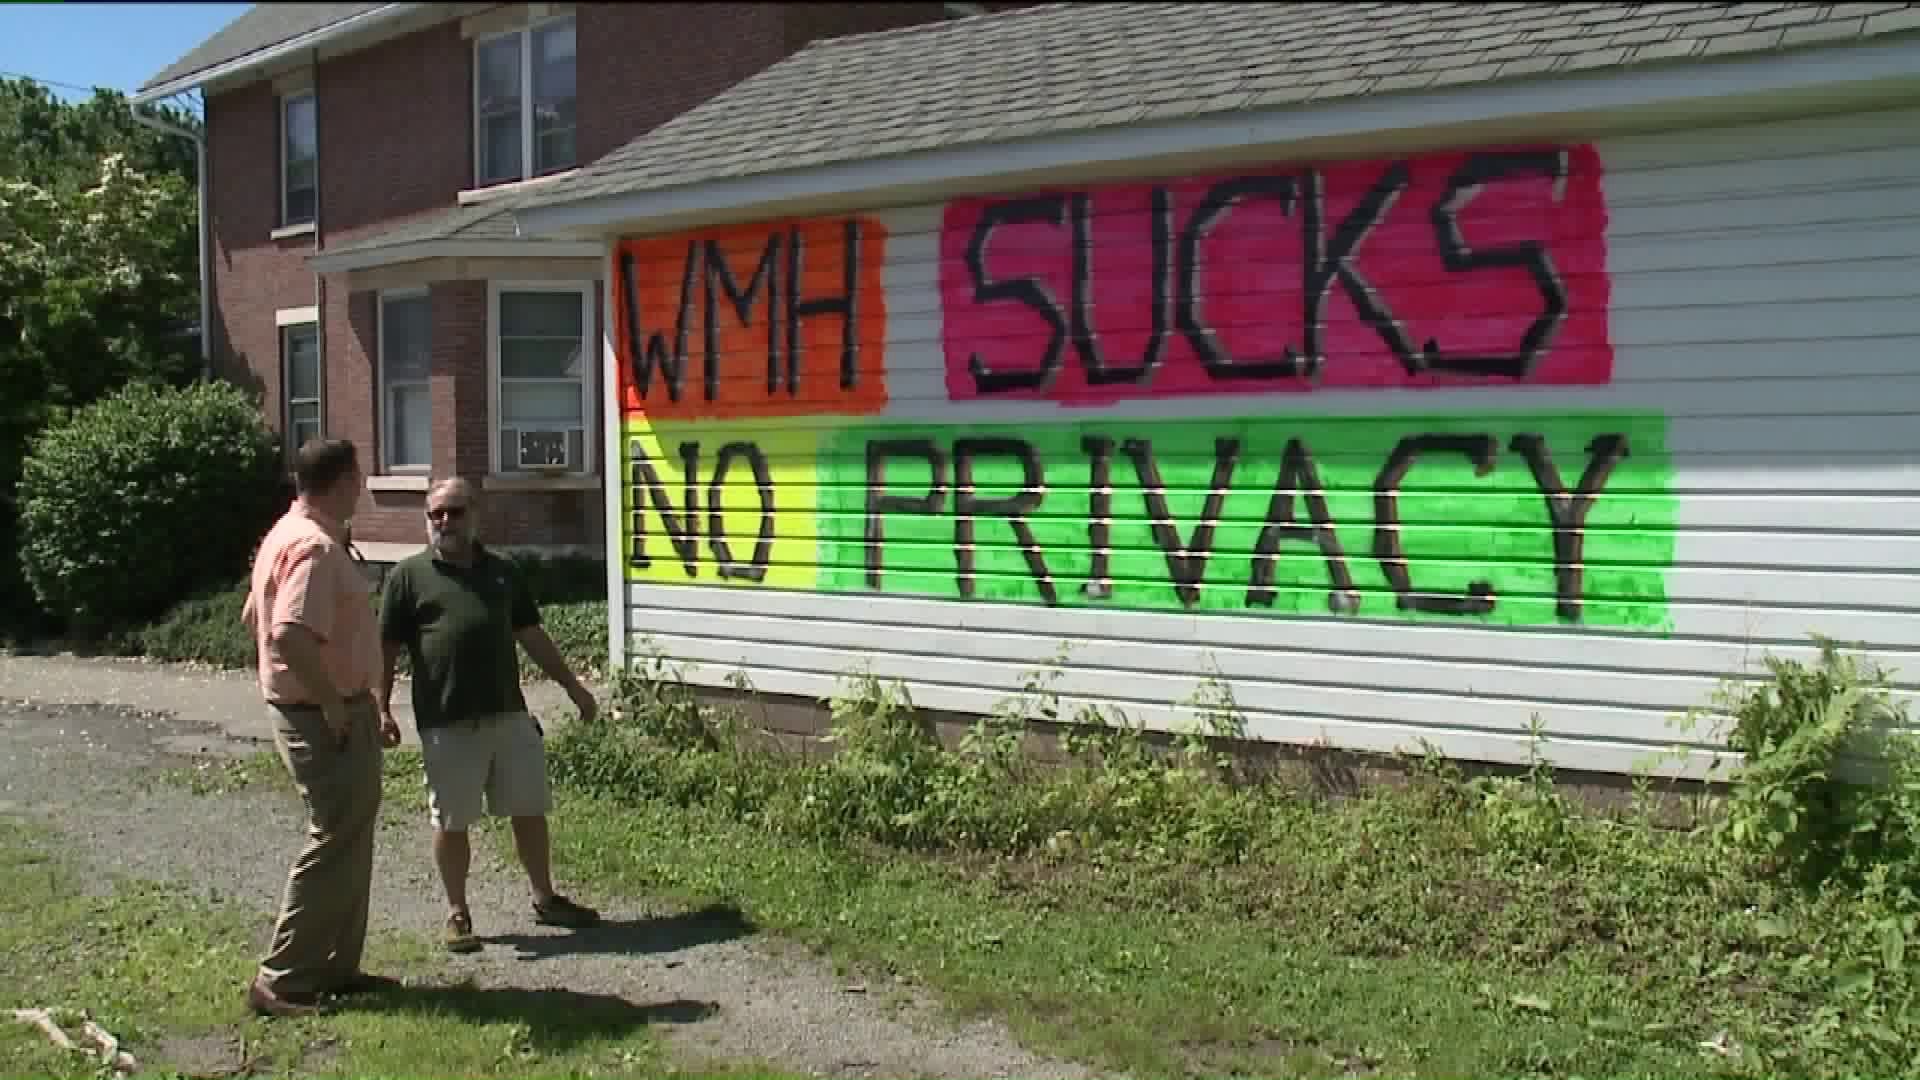 Neighbor Paints Message on Garage for Hospital